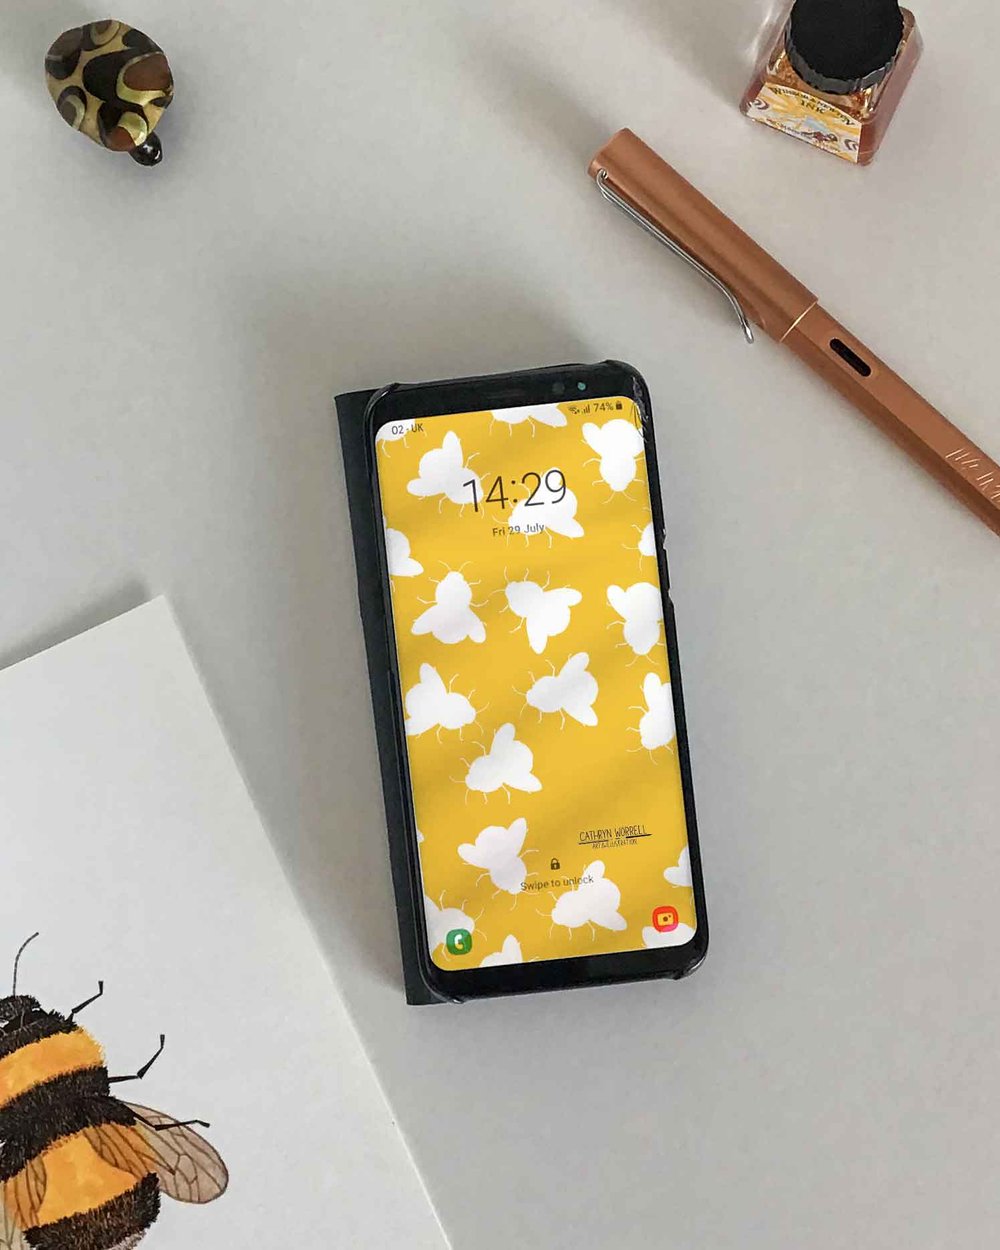 Bumble bee phone wallpaper for August — Cathryn Worrell Art & Illustration